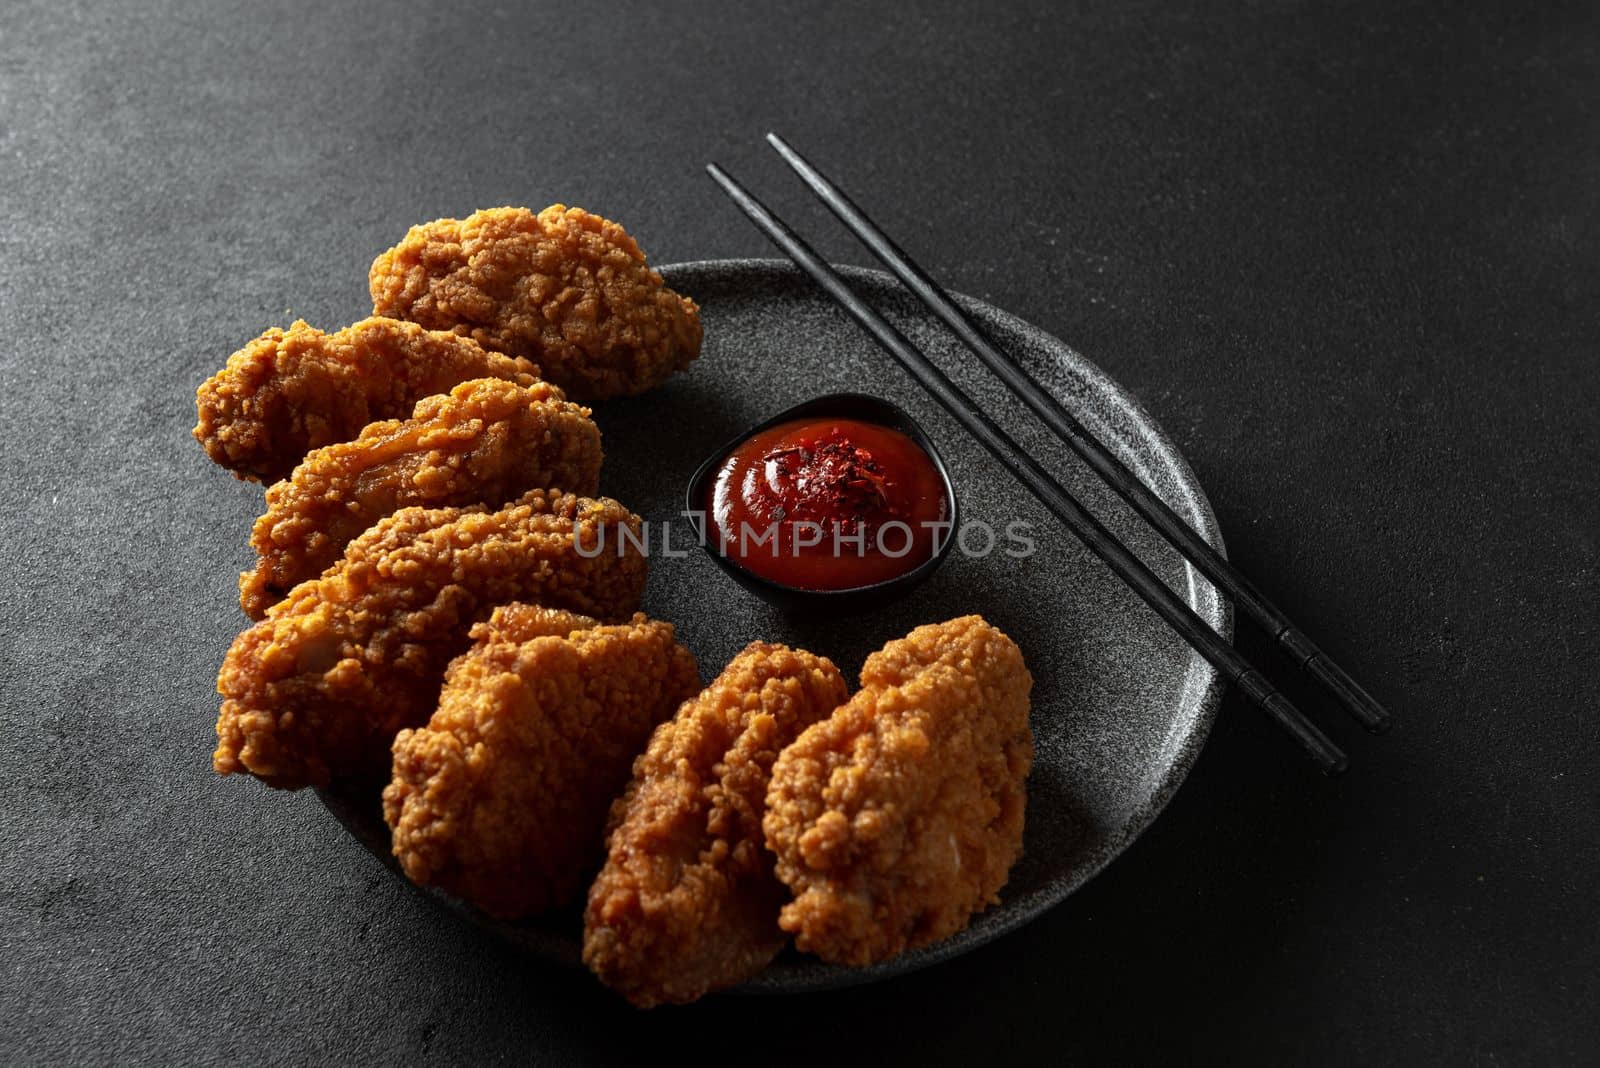 Spicy pieces of chicken fillet in crispy breading, on a black plate on a dark background, stone or concrete. Top view with a copying spot